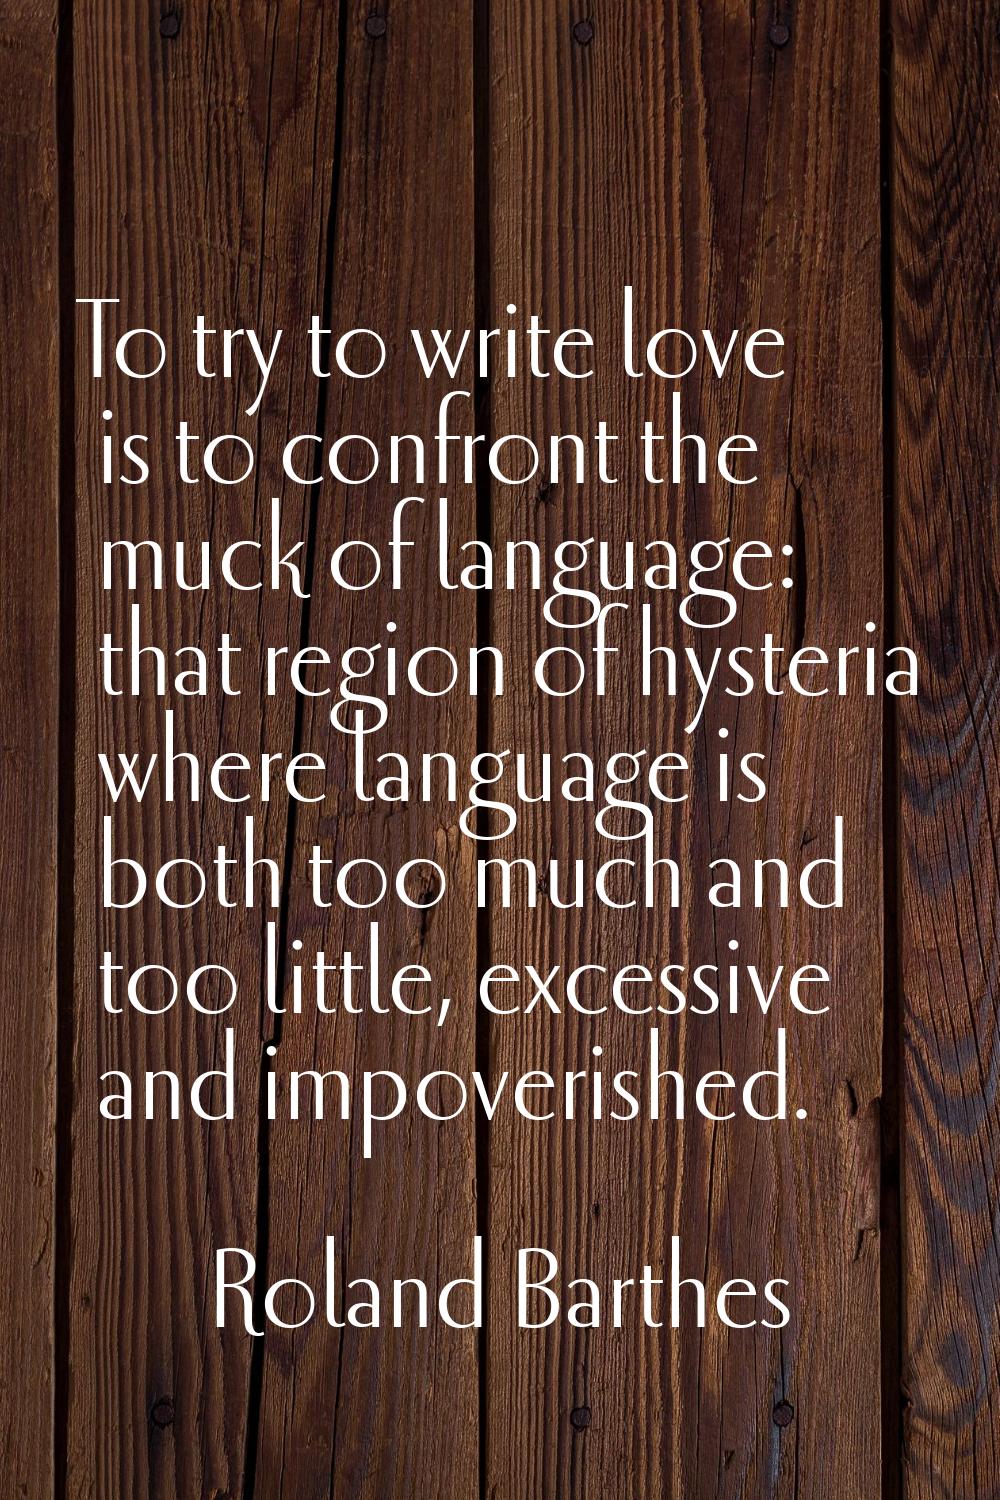 To try to write love is to confront the muck of language: that region of hysteria where language is